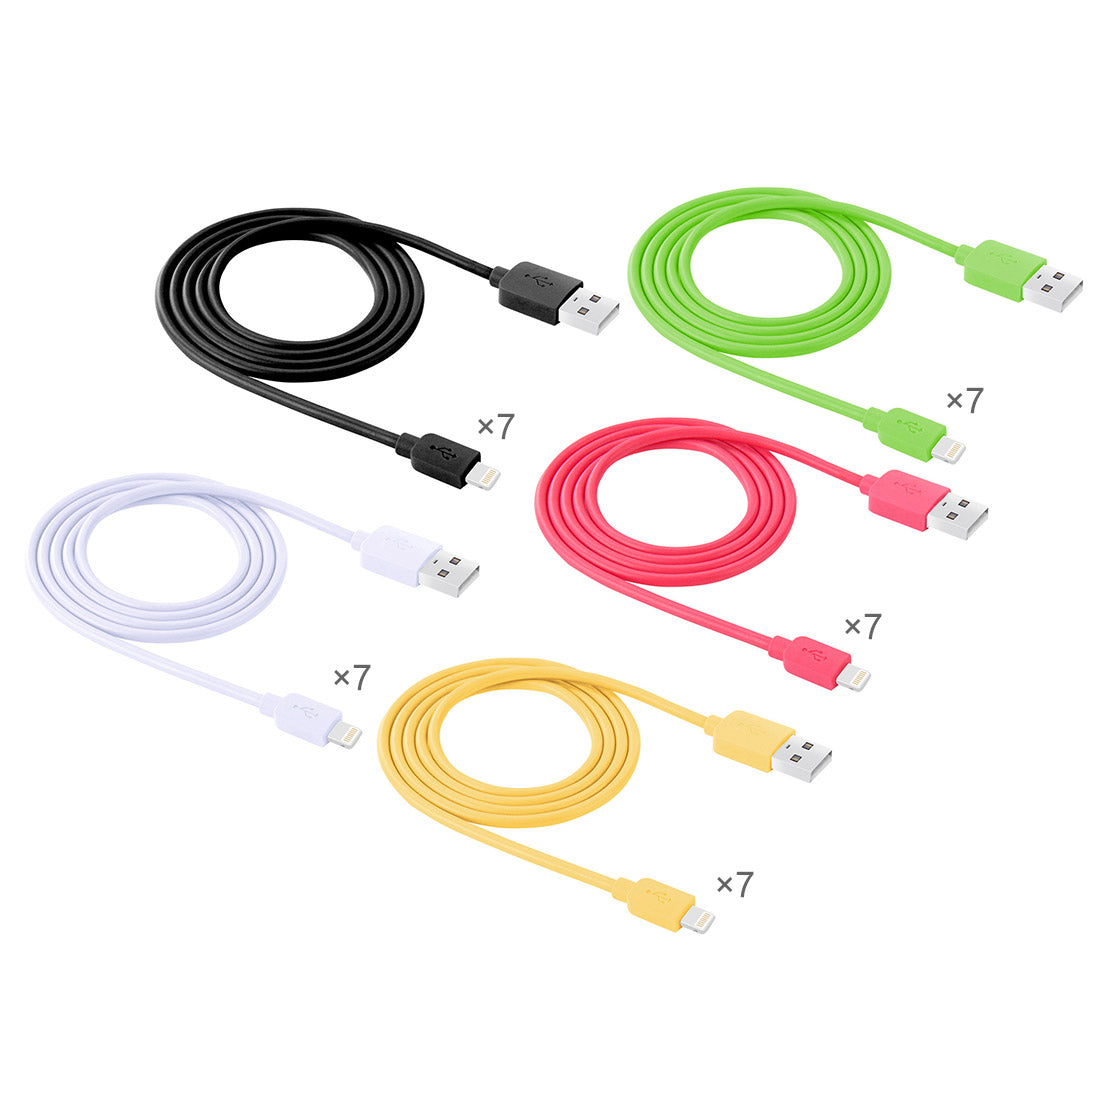 35 PCS Mixed Colors HAWEEL 1m High Speed 35 Cores 8 pin to USB Sync Charging Cable Kit with Candy Cans Package, For iPhone XR / iPhone XS MAX / iPhone X & XS / iPhone 8 & 8 Plus / iPhone 7 & 7 Plus / iPhone 6 & 6s & 6 Plus & 6s Plus / iPad